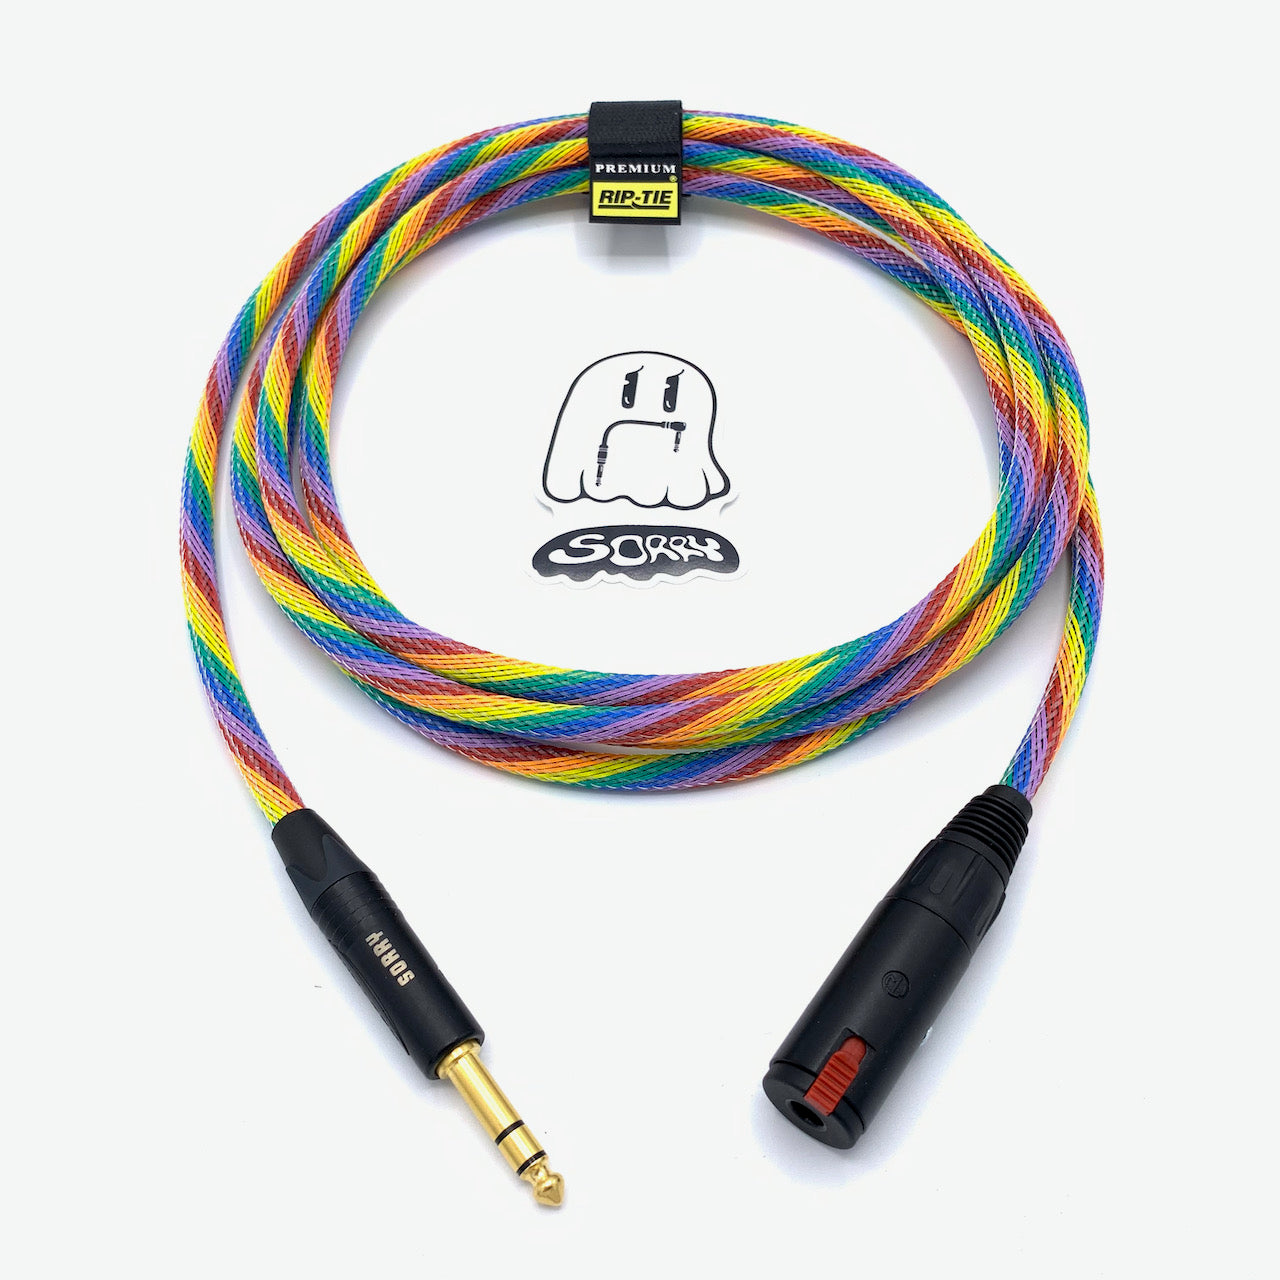 SORRY Locking Headphone Extension Cable - Rainbow